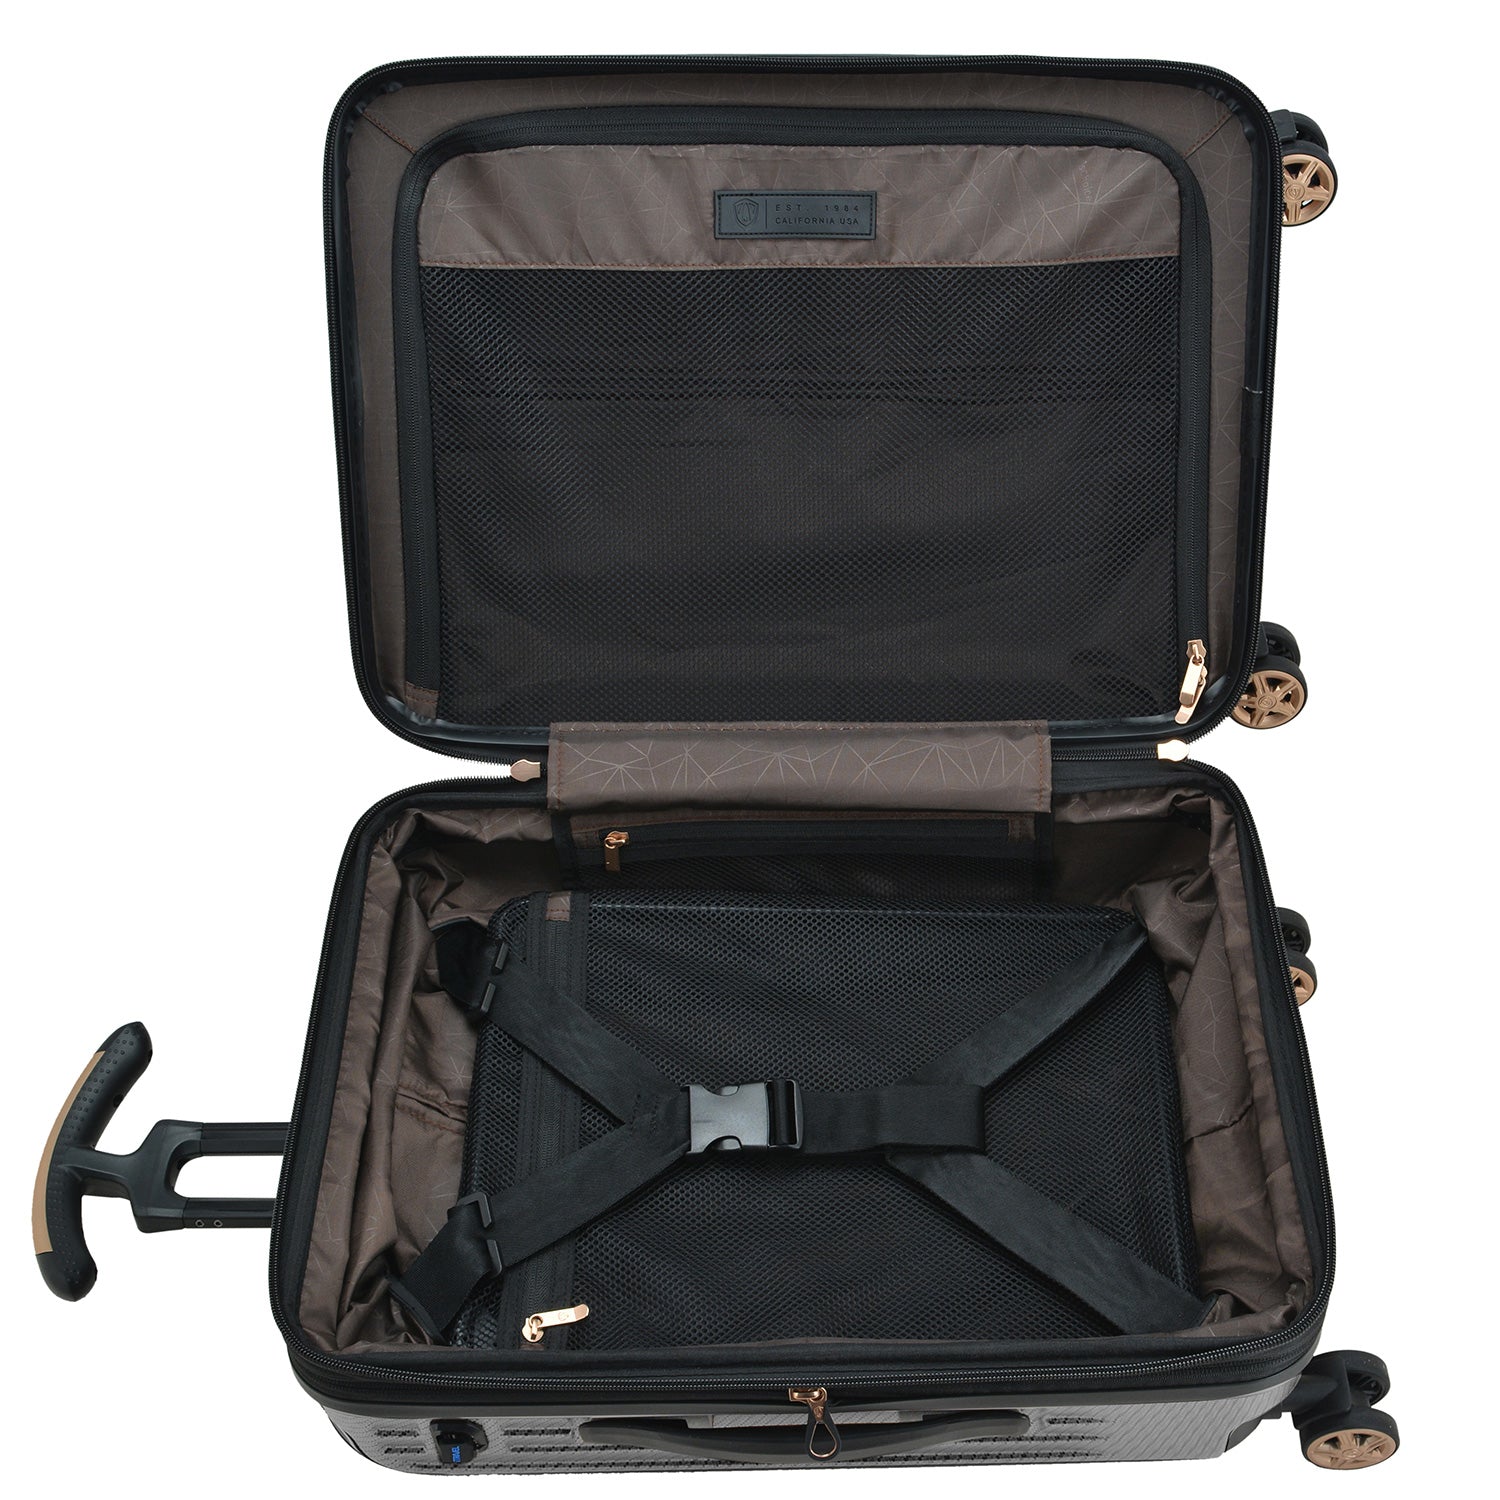 Continent Adventurer 3 Piece Luggage Suitcase Set with 4 Spinner Wheels | Carry On with USB Port, Medium Checked, and Large Checked Suitcase